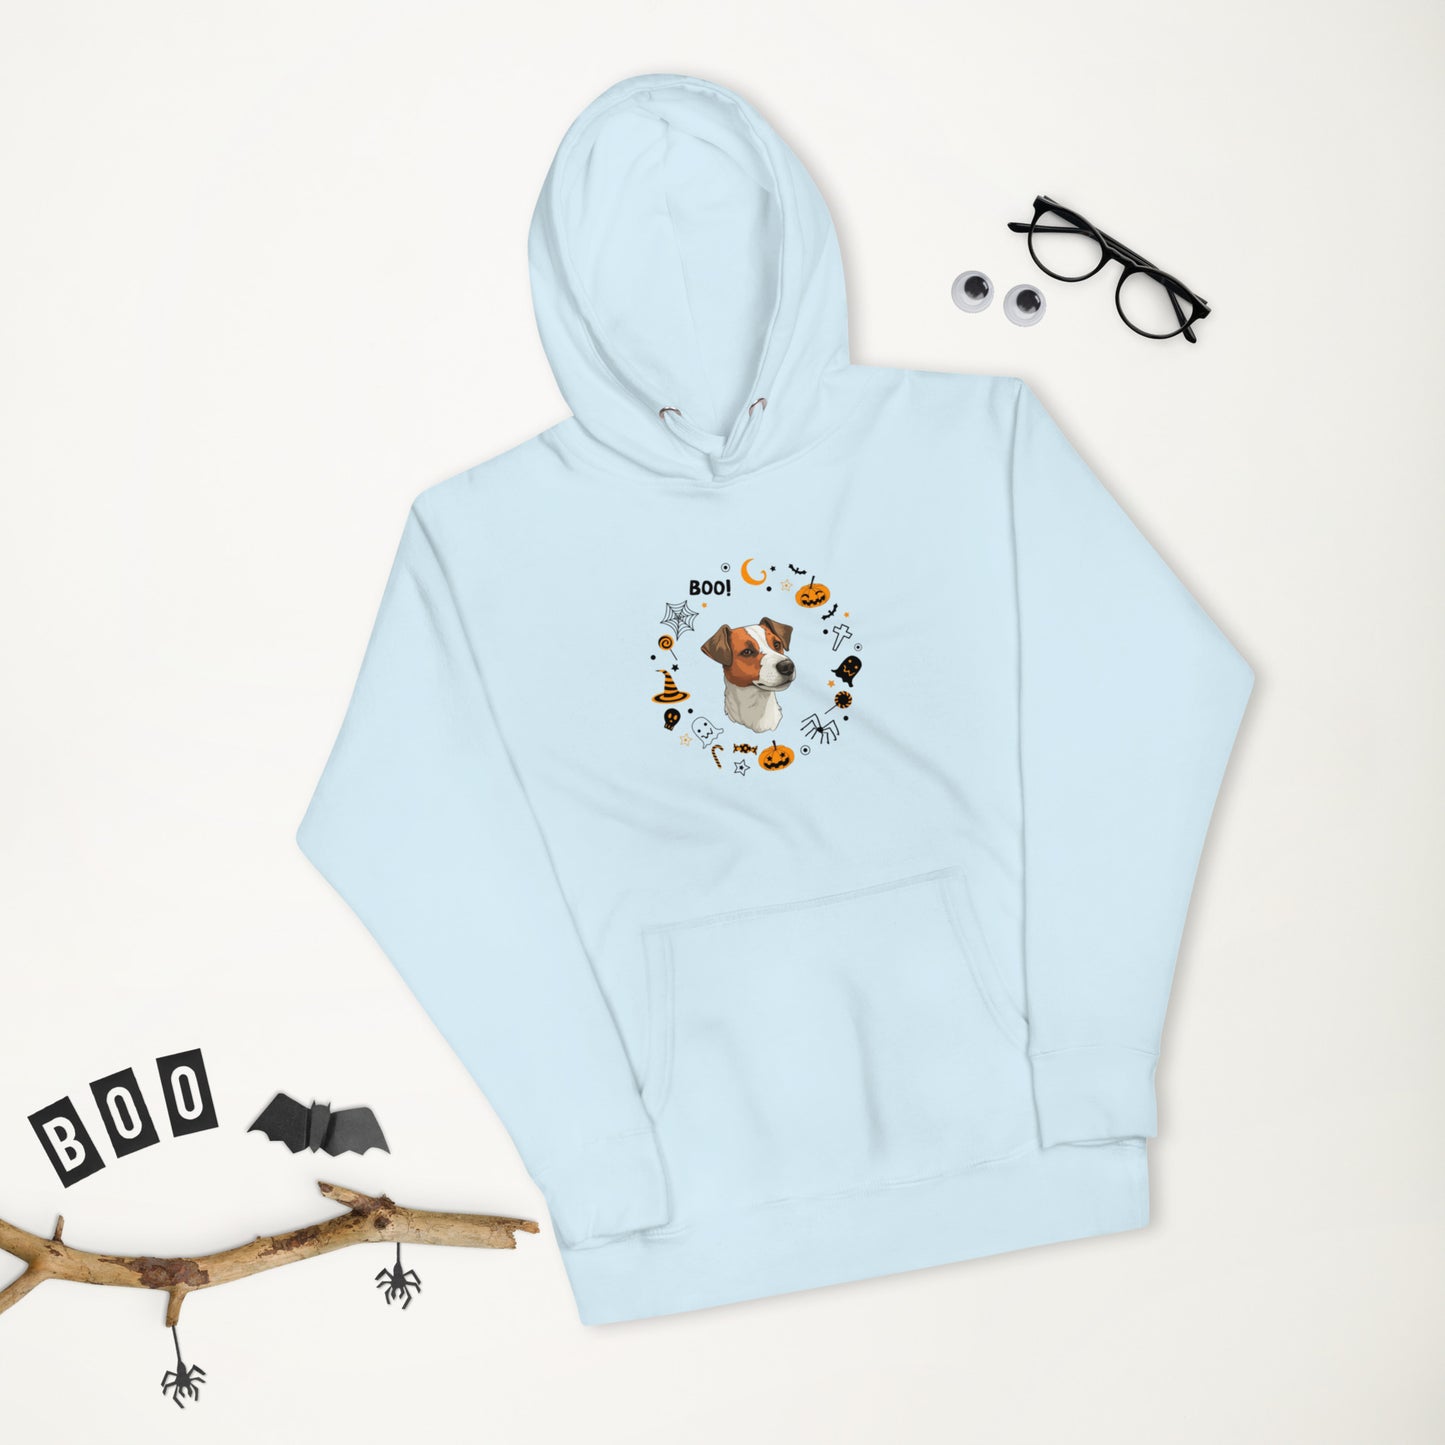 Unisex Hoodie / Jack Russel terrier gift / Parson Russel dog Halloween gift for dog lovers